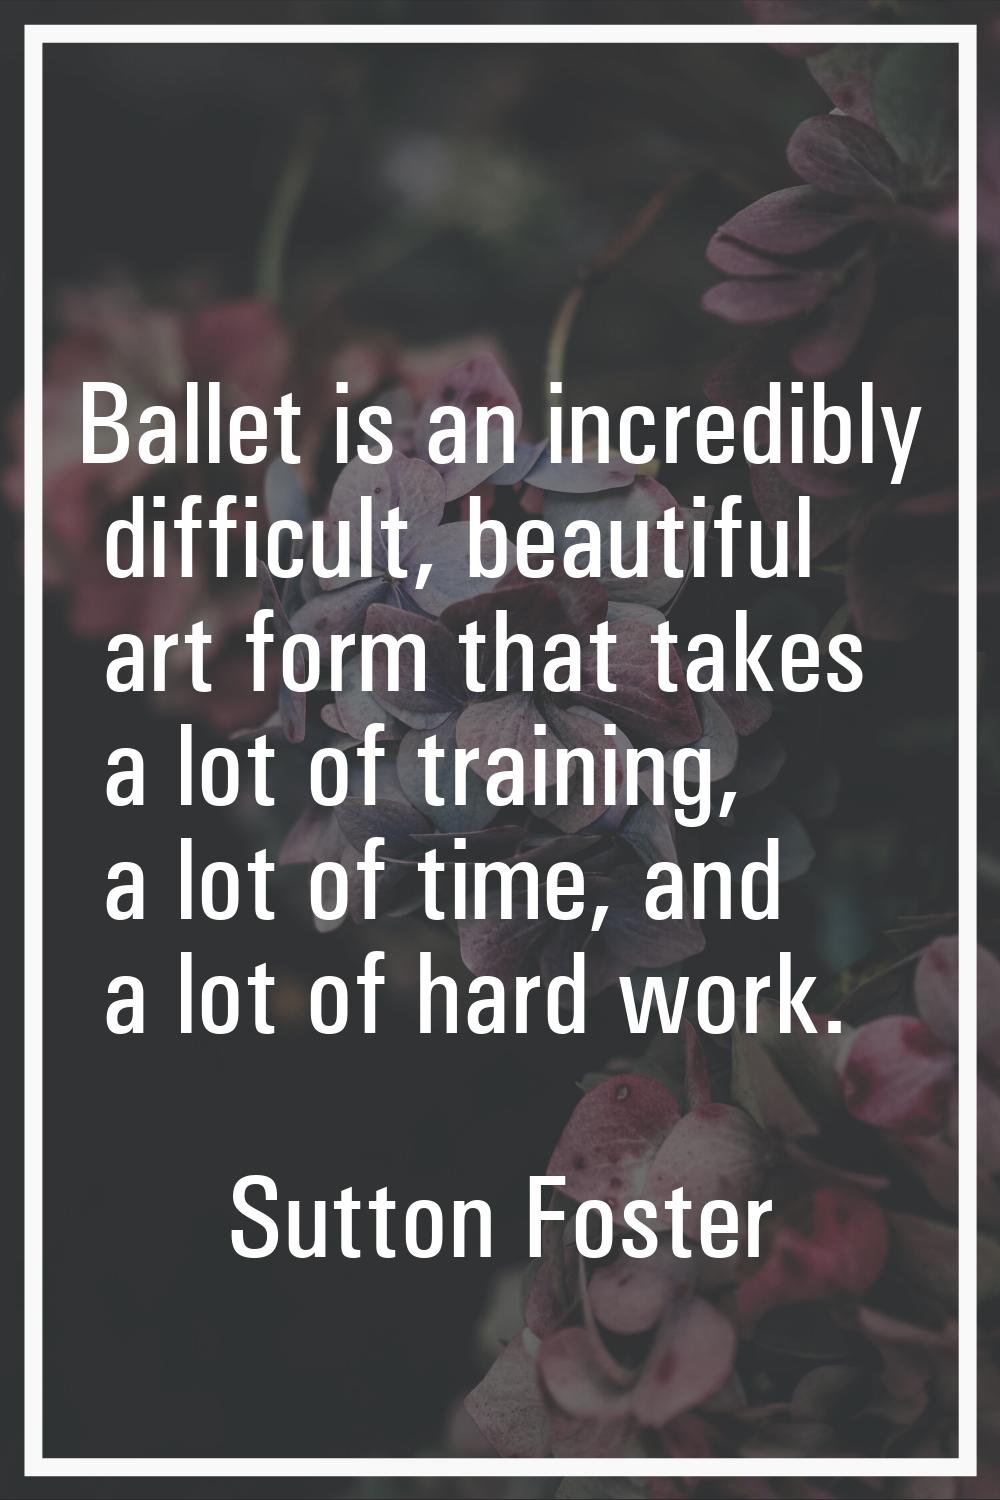 Ballet is an incredibly difficult, beautiful art form that takes a lot of training, a lot of time, 